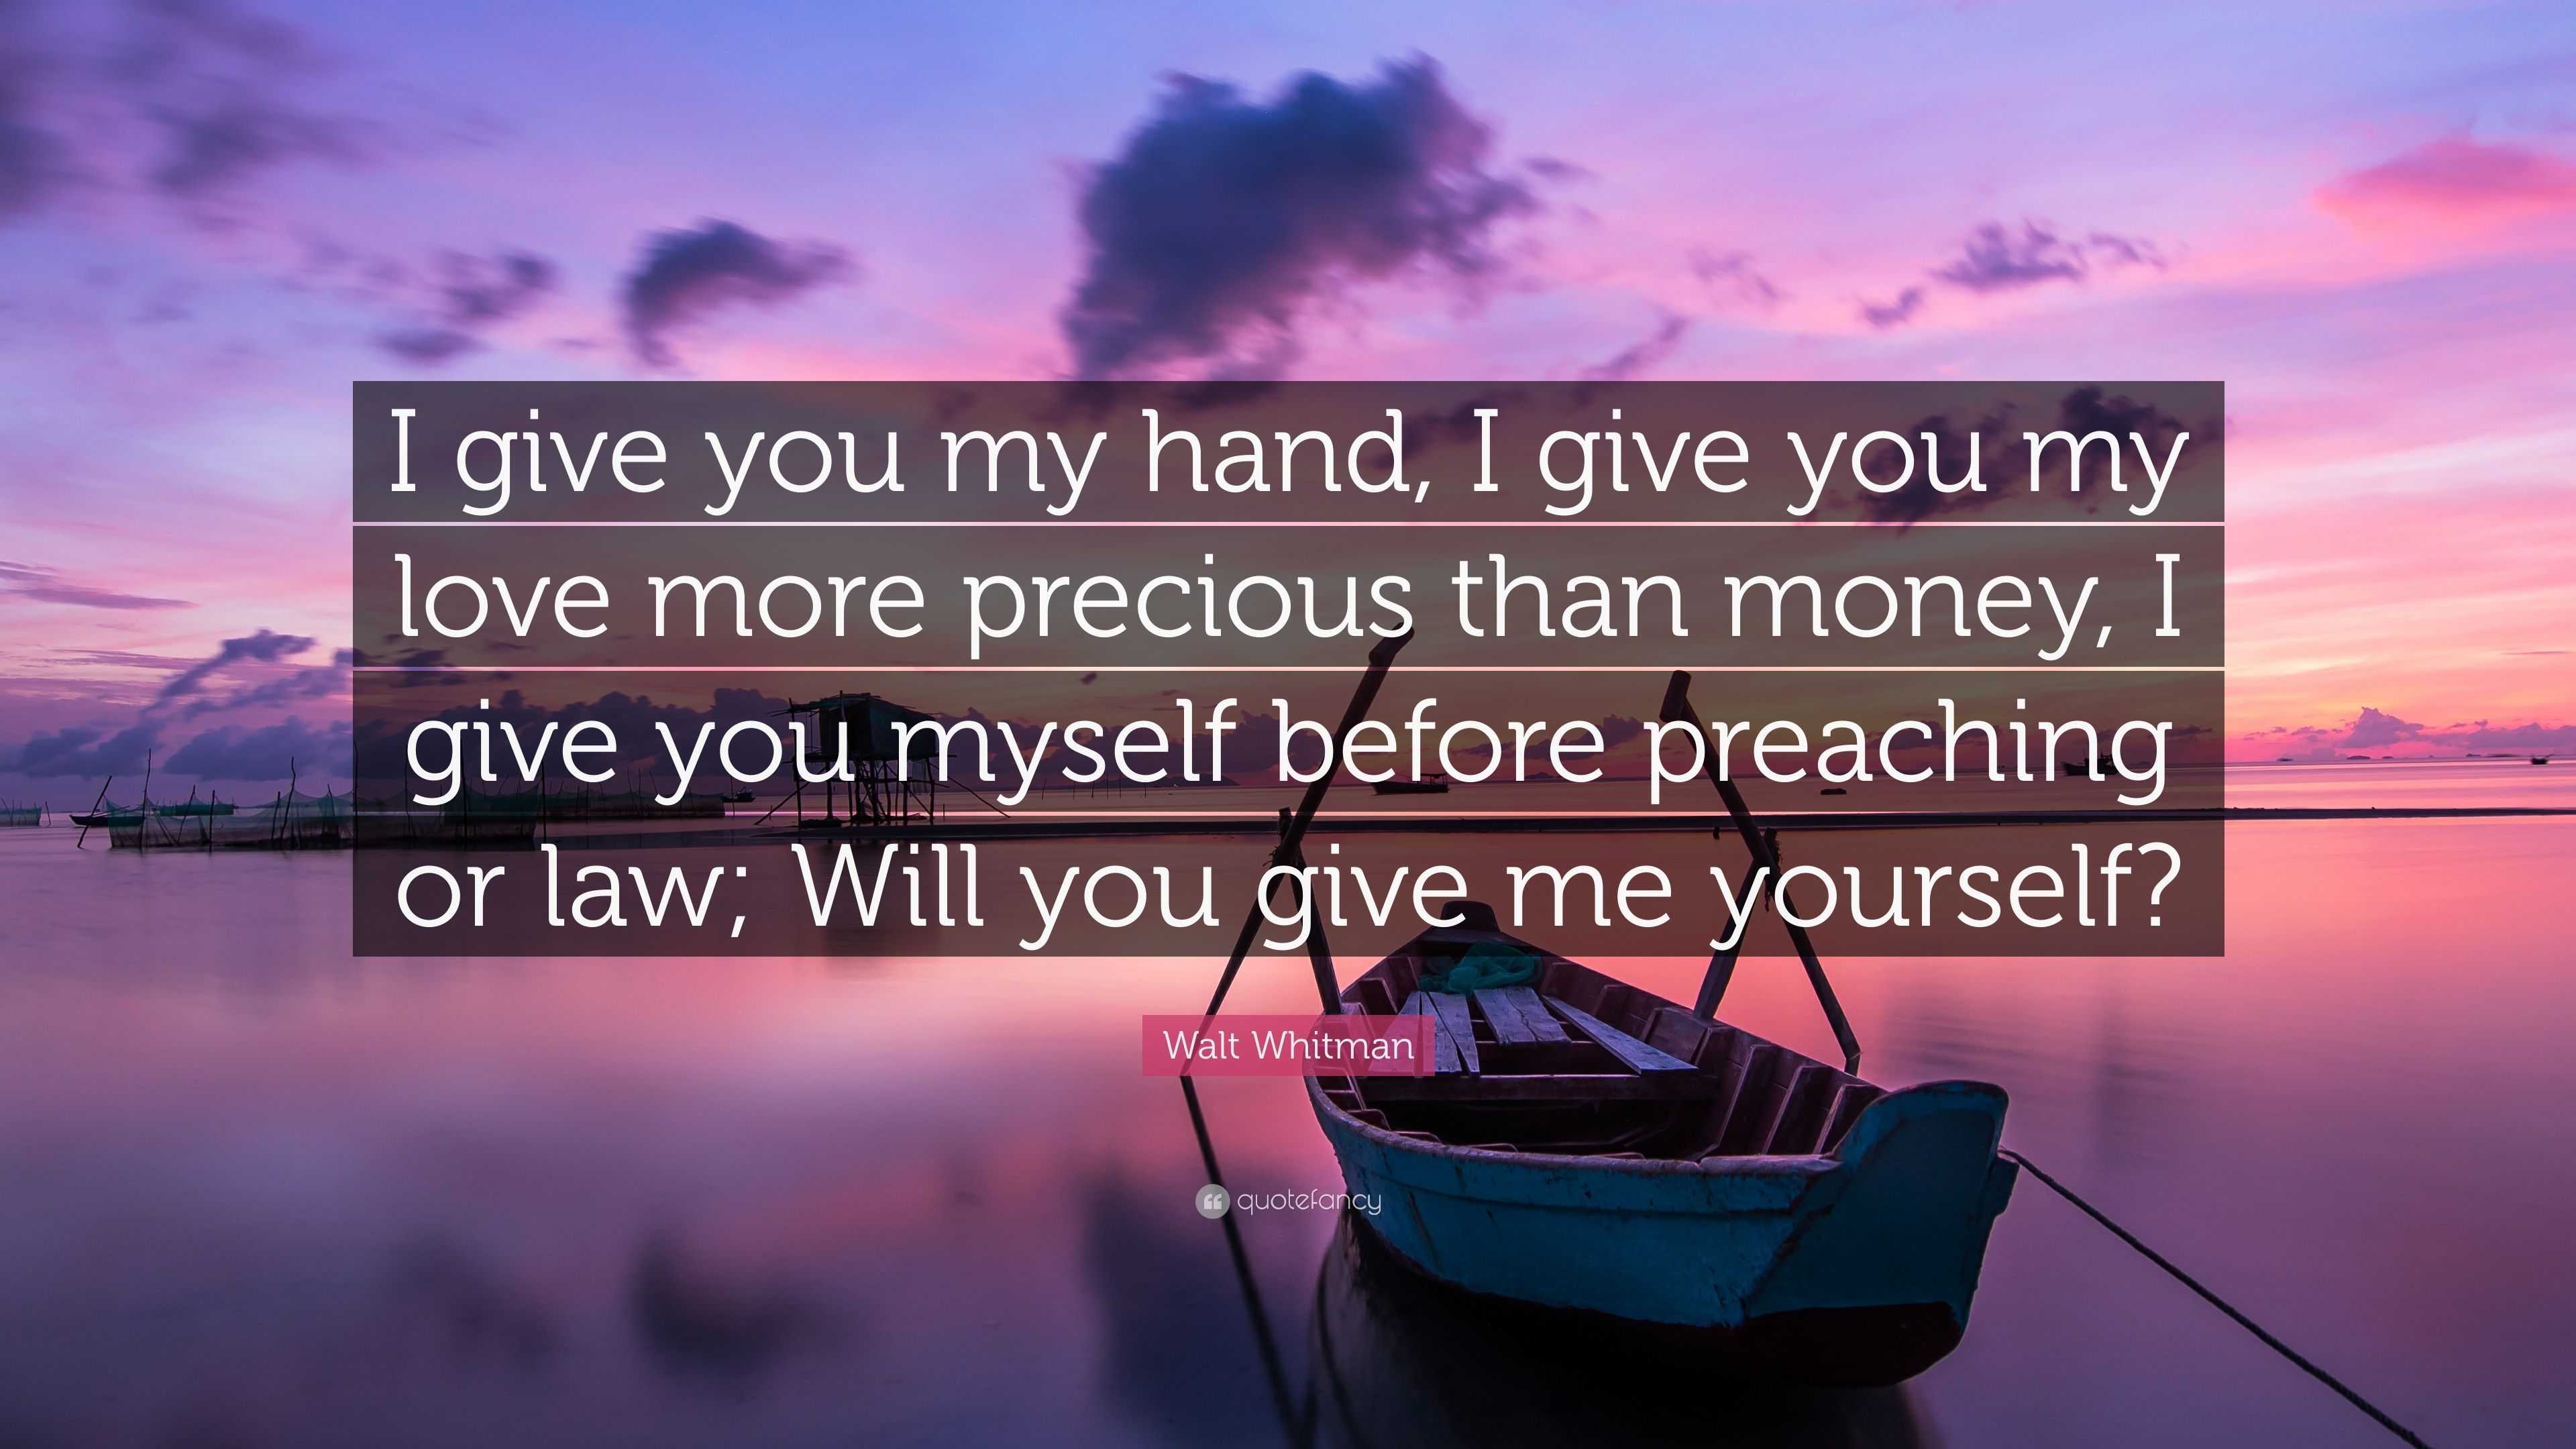 Walt Whitman Quote: “I give you my hand, I give you my love more